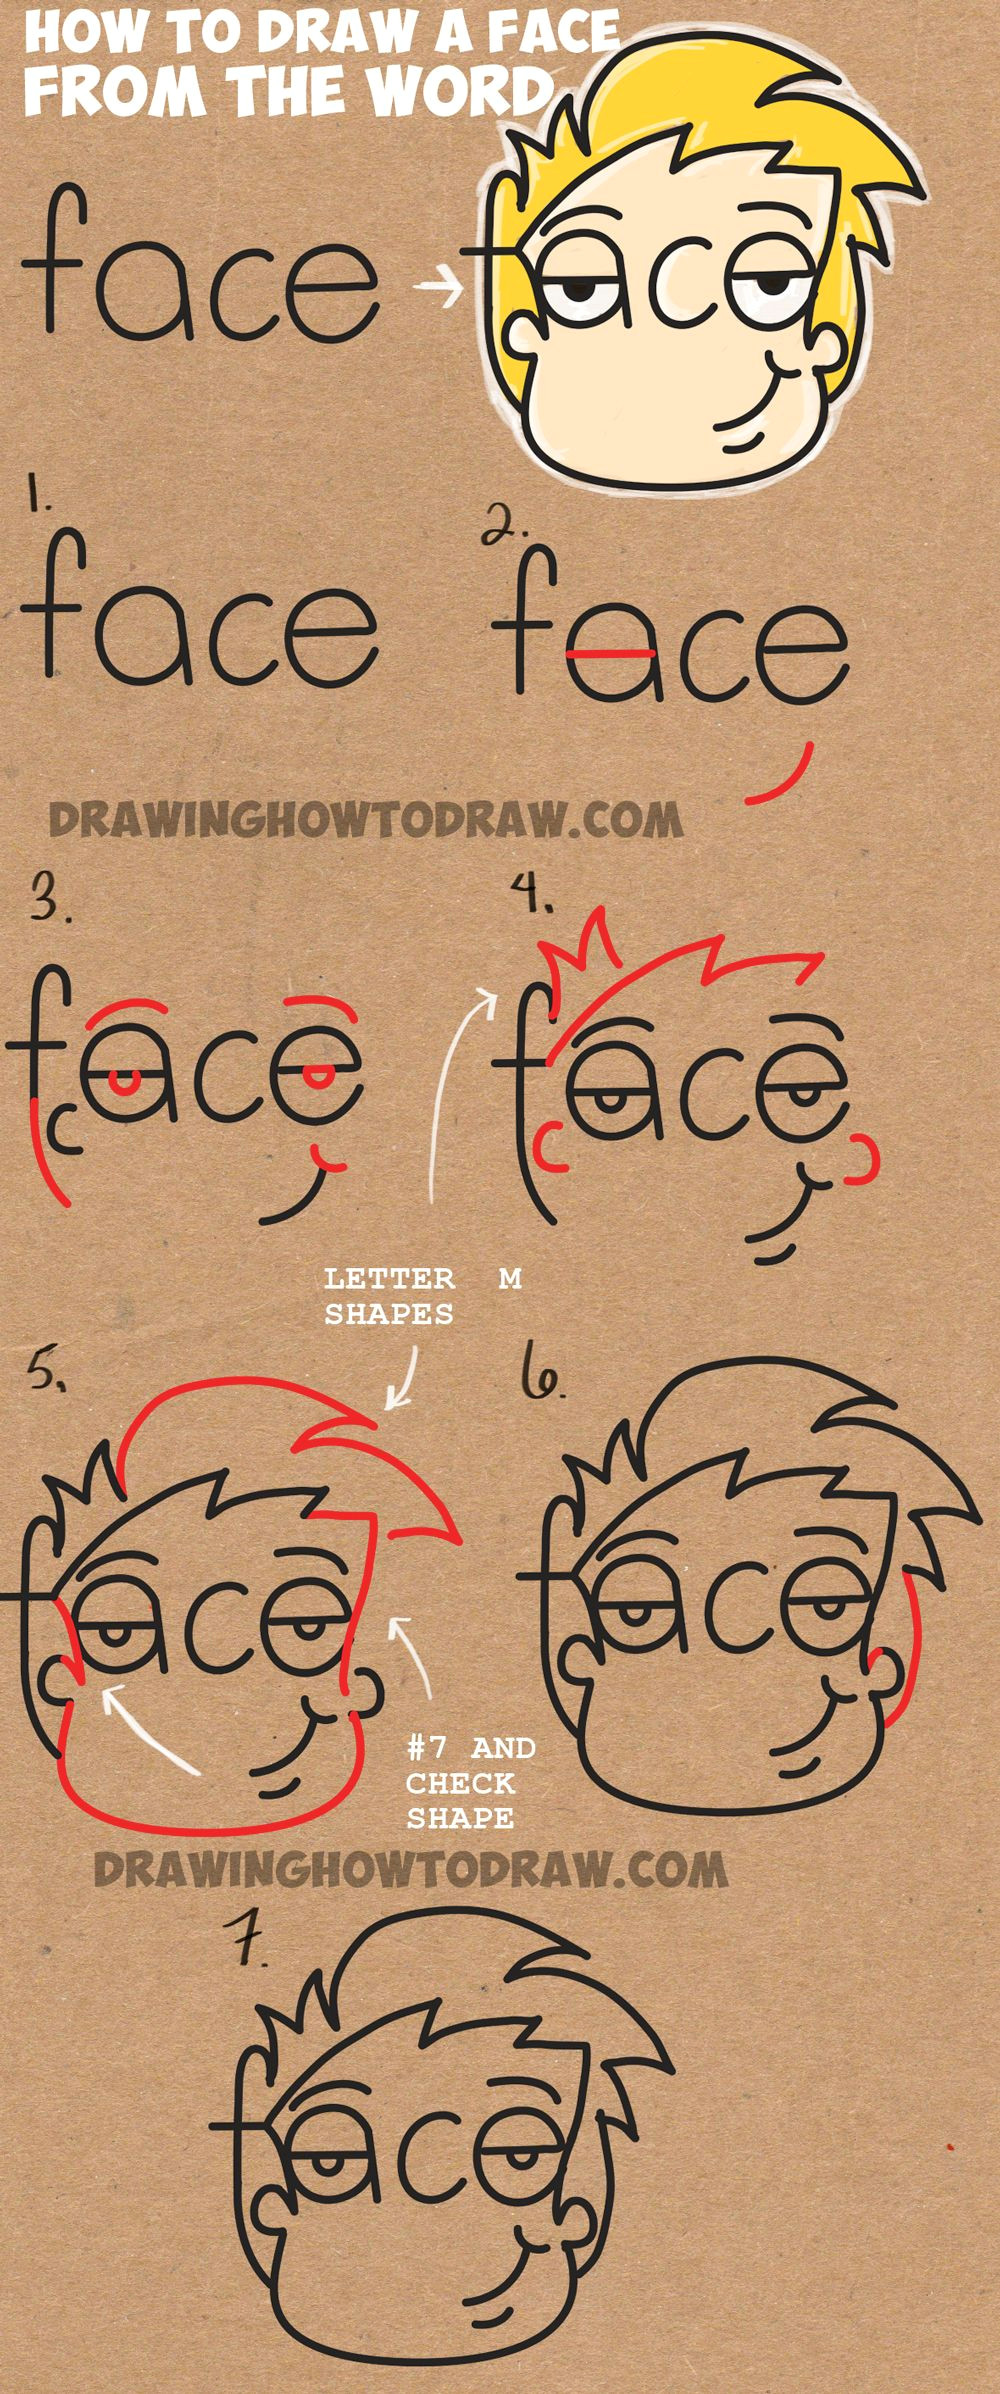 Easy Drawing with Numbers How to Draw Cartoon Faces From the Word Face Easy Step by Step